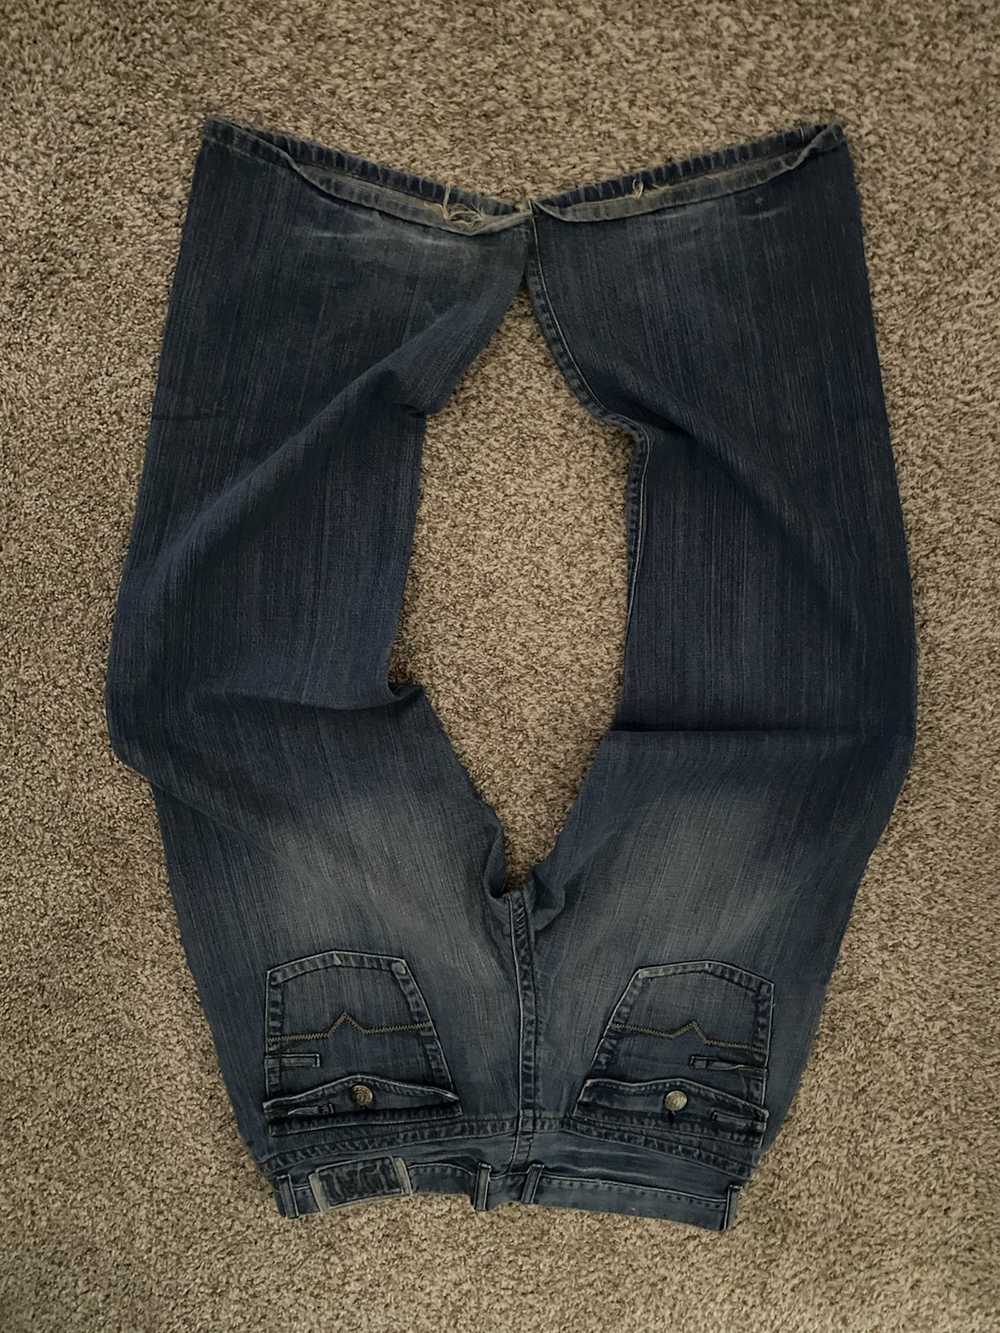 Guess VINTAGE Y2K GUESS BAGGY JEANS - image 2